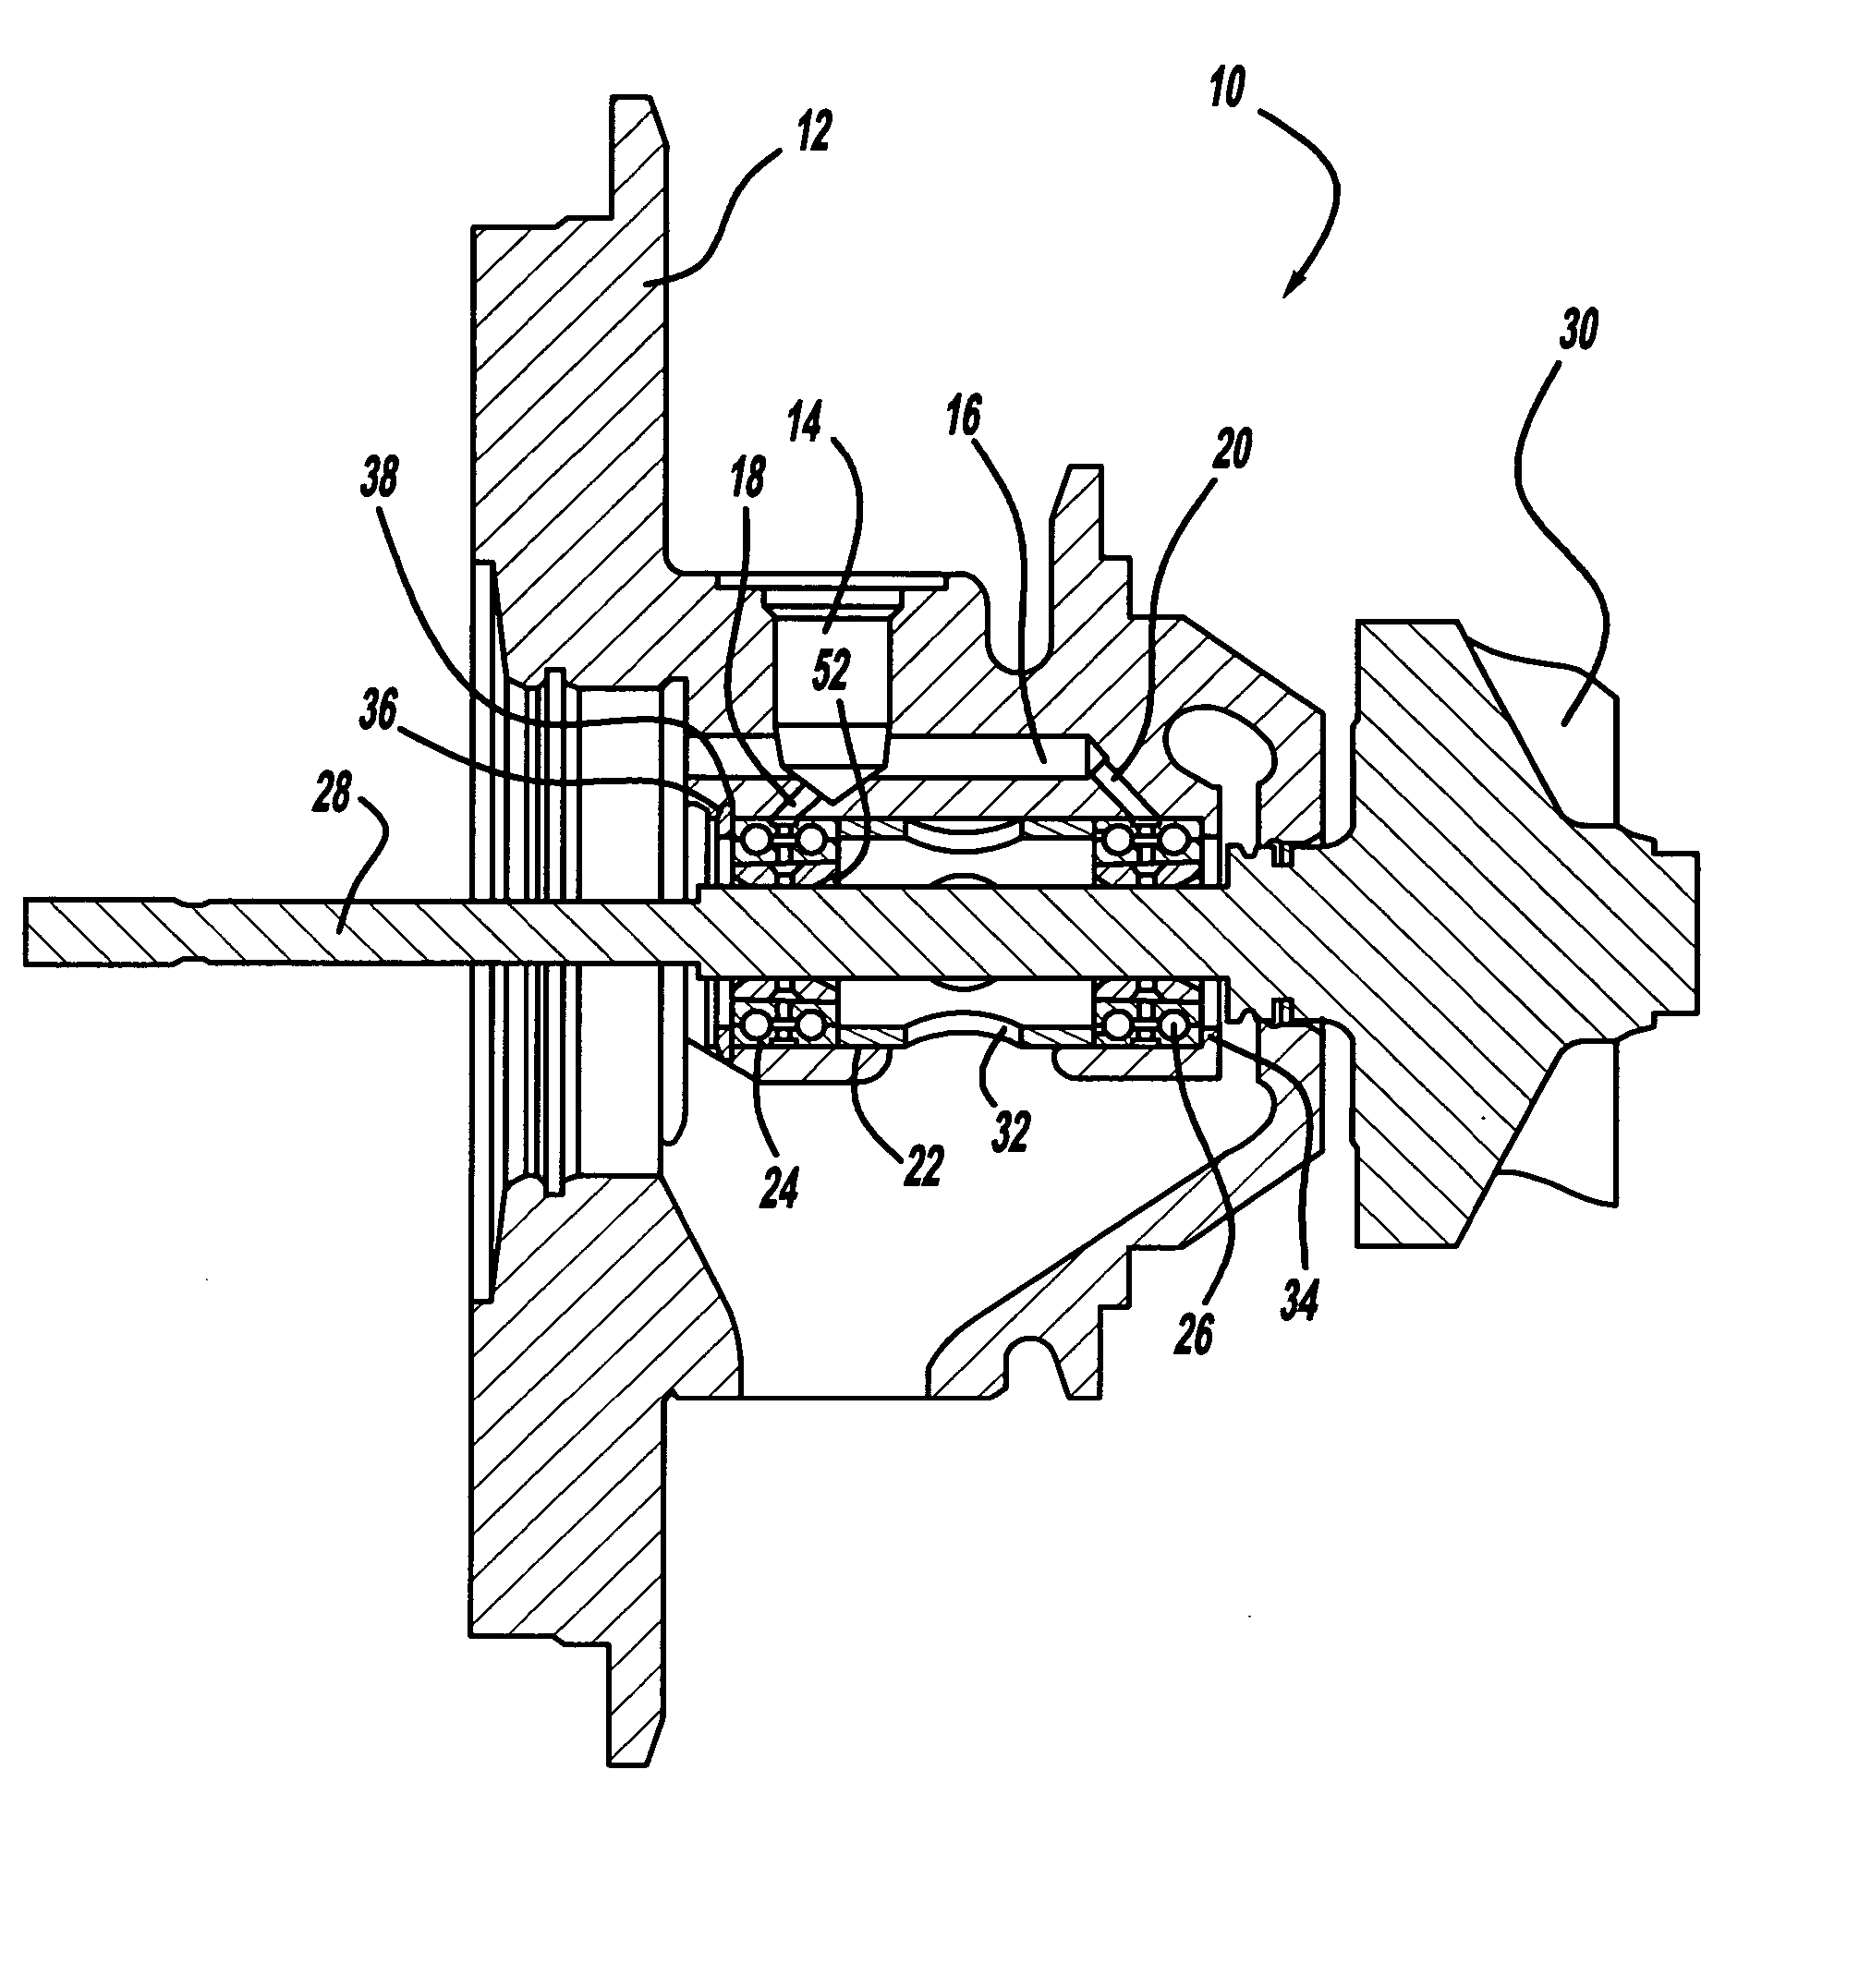 Combination hydrodynamic and rolling bearing system